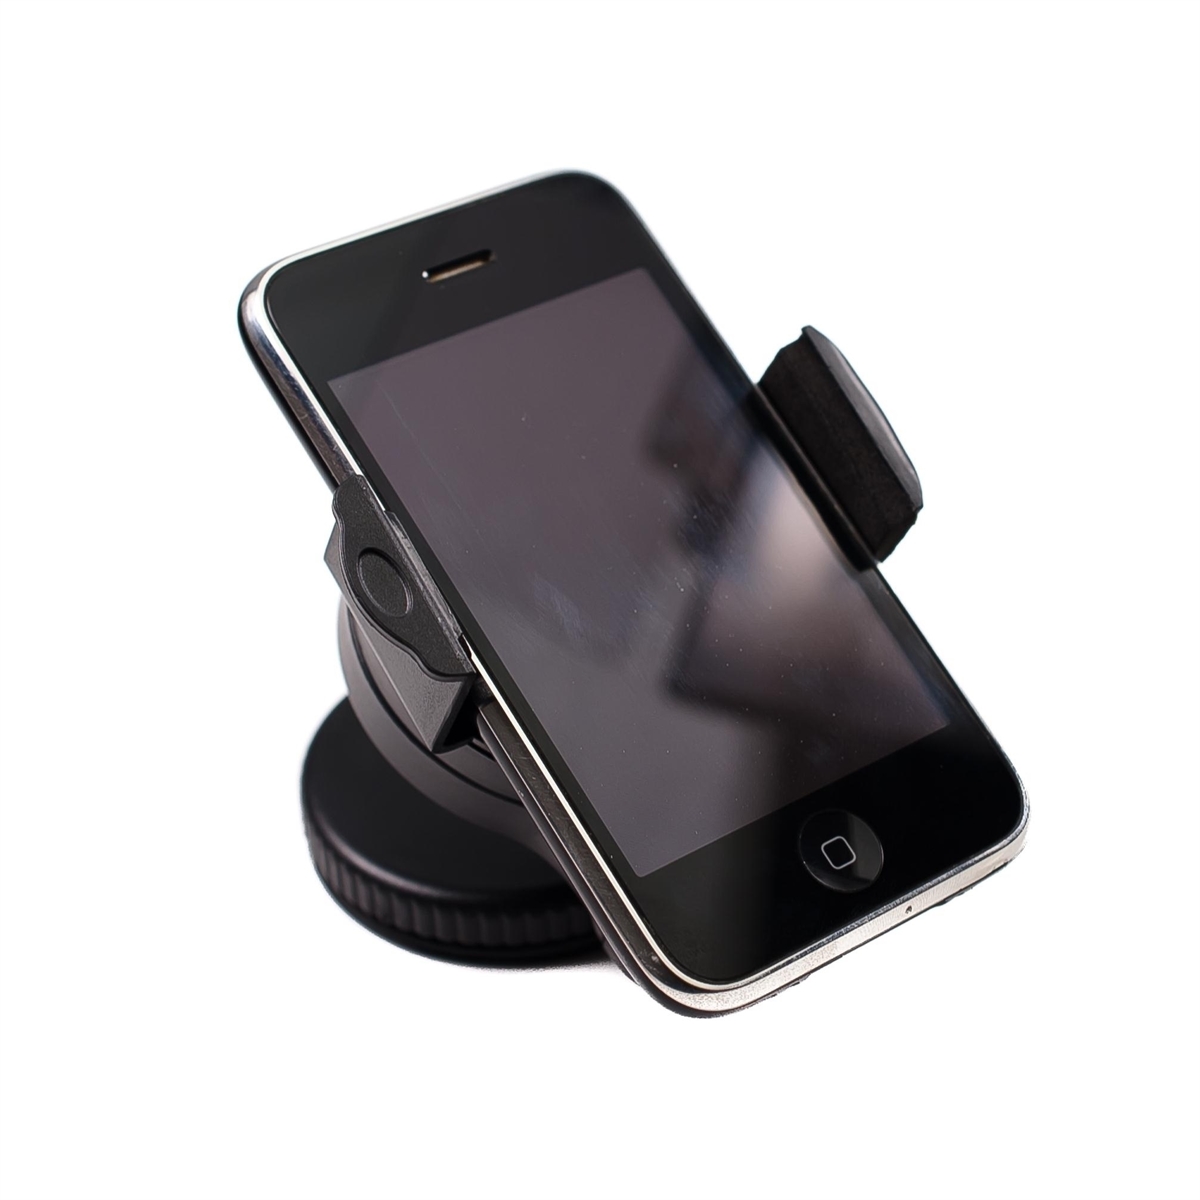 WIND SHIELD CAR HOLDER FOR APPLE IPHONE 3G / 3GS + CHARGER DASHBOARD 